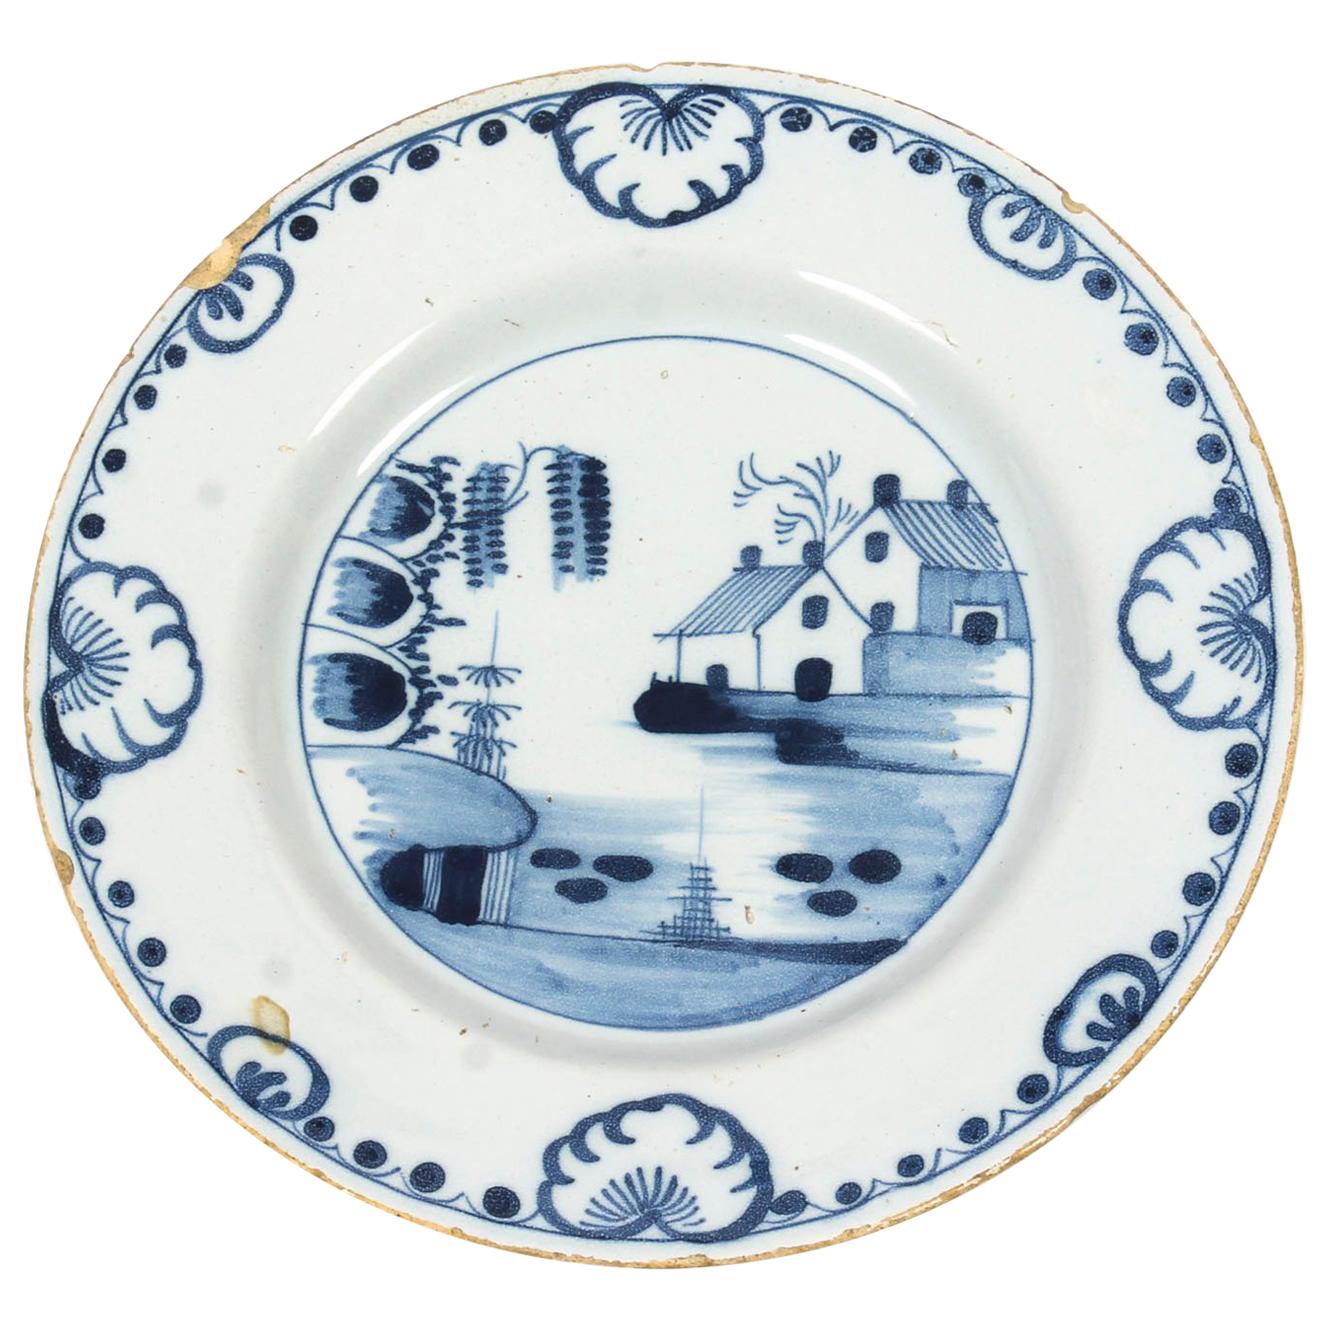 Antique English Delft Blue and White Decorated Plate, 18th Century